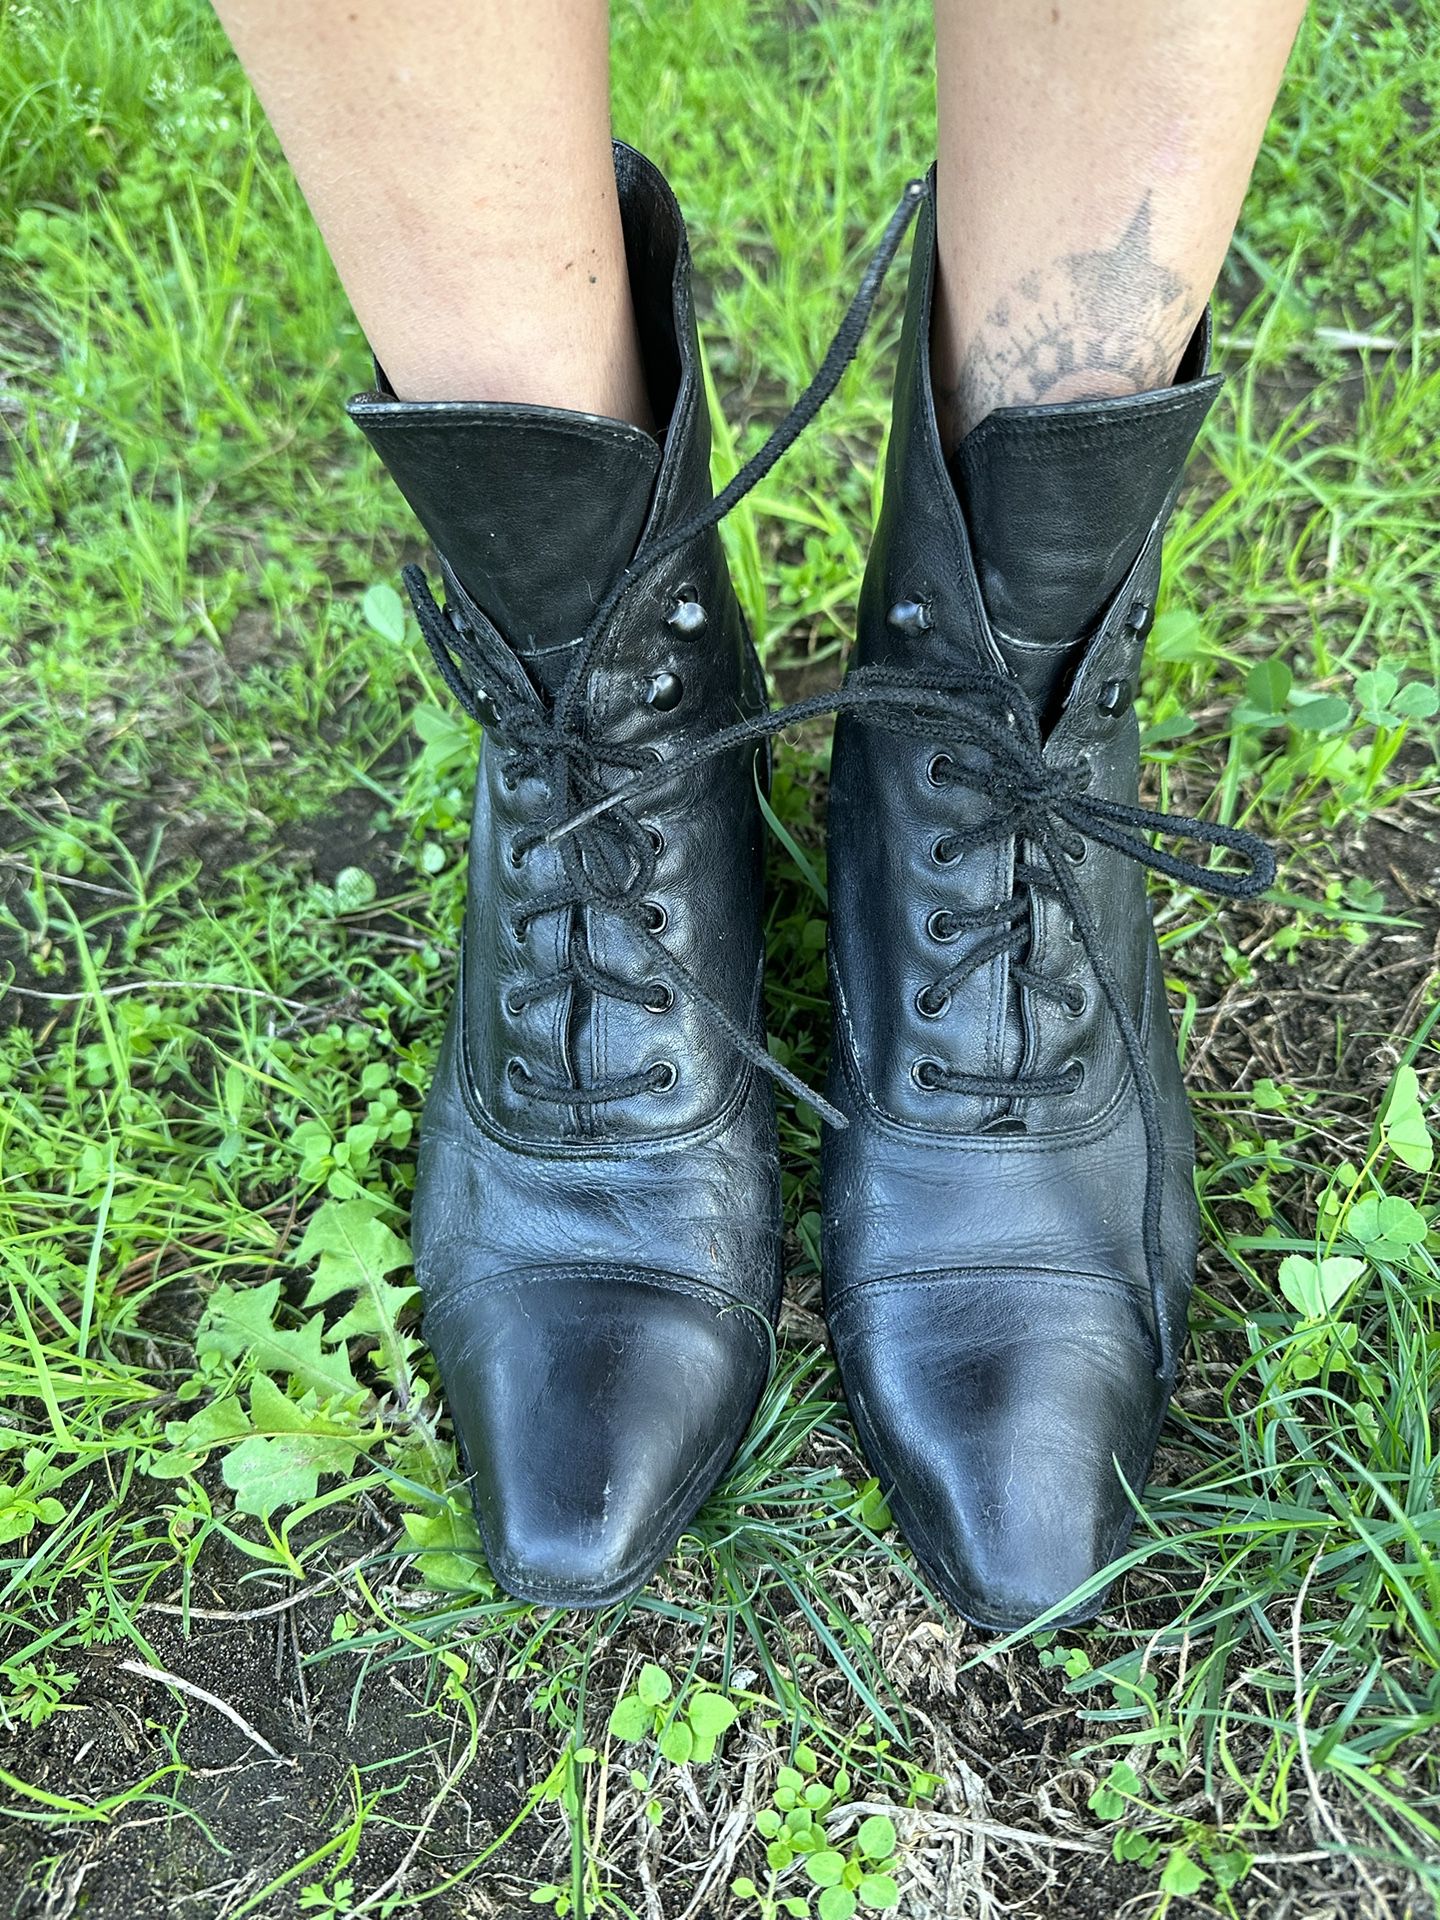 Vintage Leather Lace up Black Boots Made In Brazil